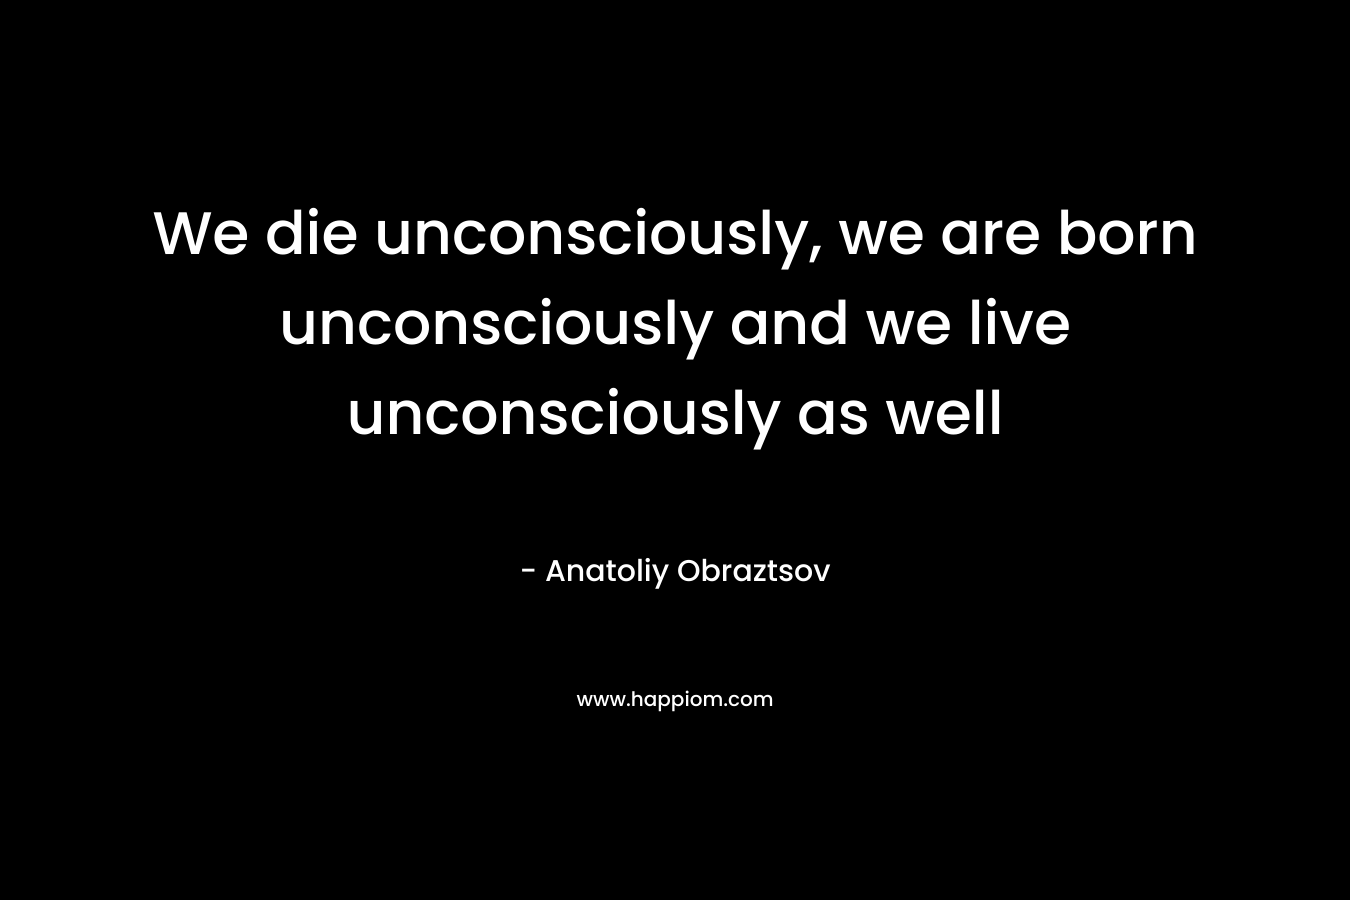 We die unconsciously, we are born unconsciously and we live unconsciously as well